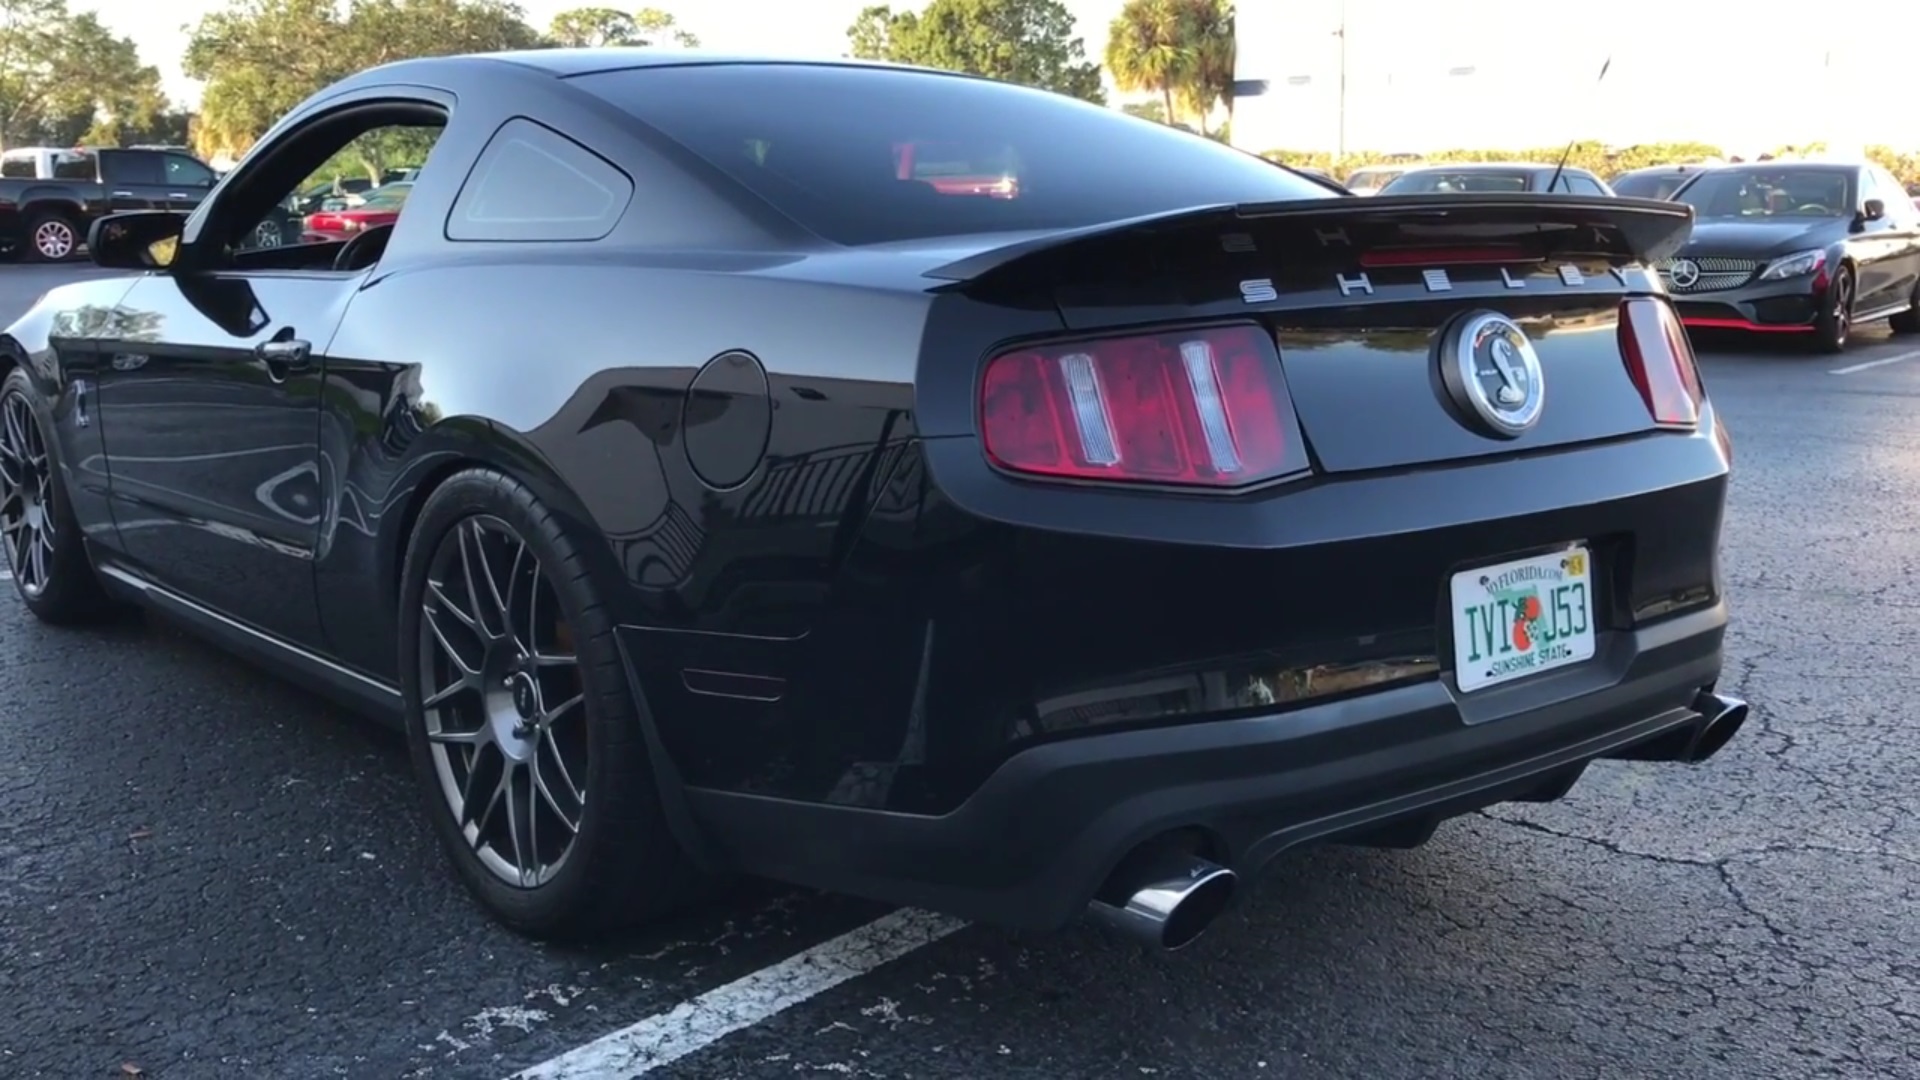 Video: Is The 2011 Ford Mustang Shelby GT500 The King Of The Streets?